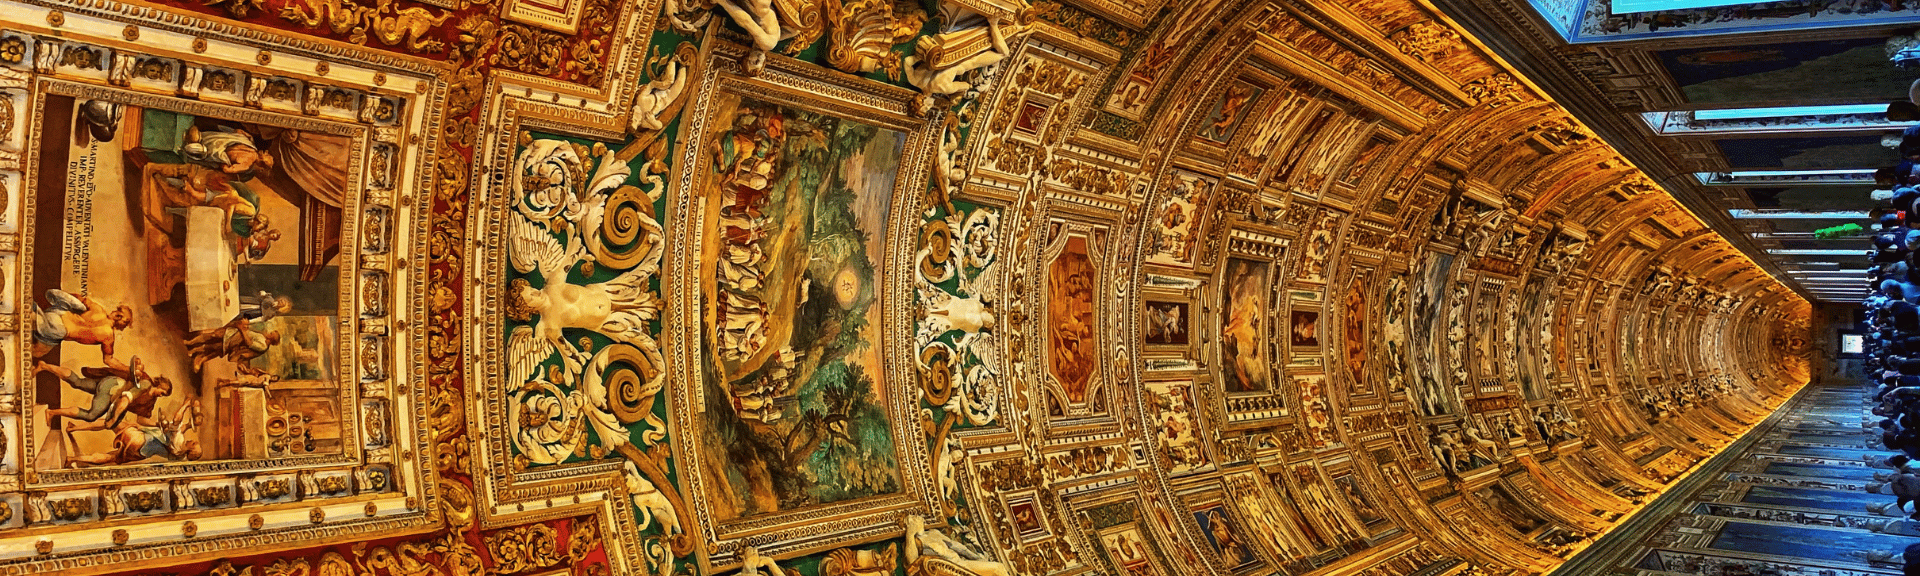 An image of the sistine chapel ceiling.